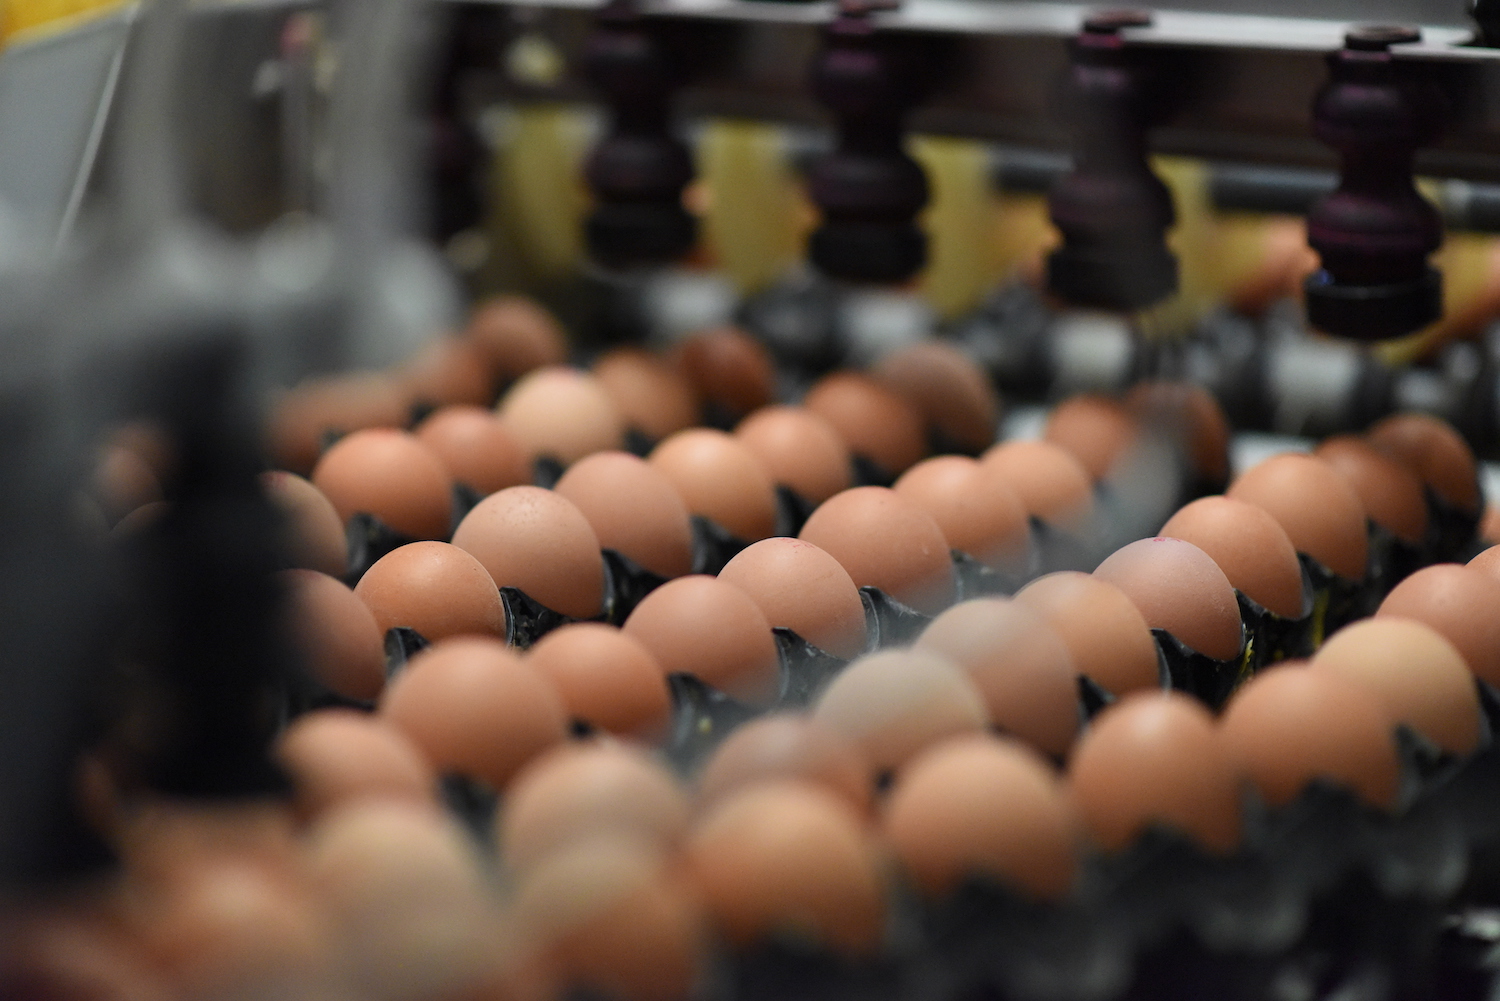 Eggs being packed